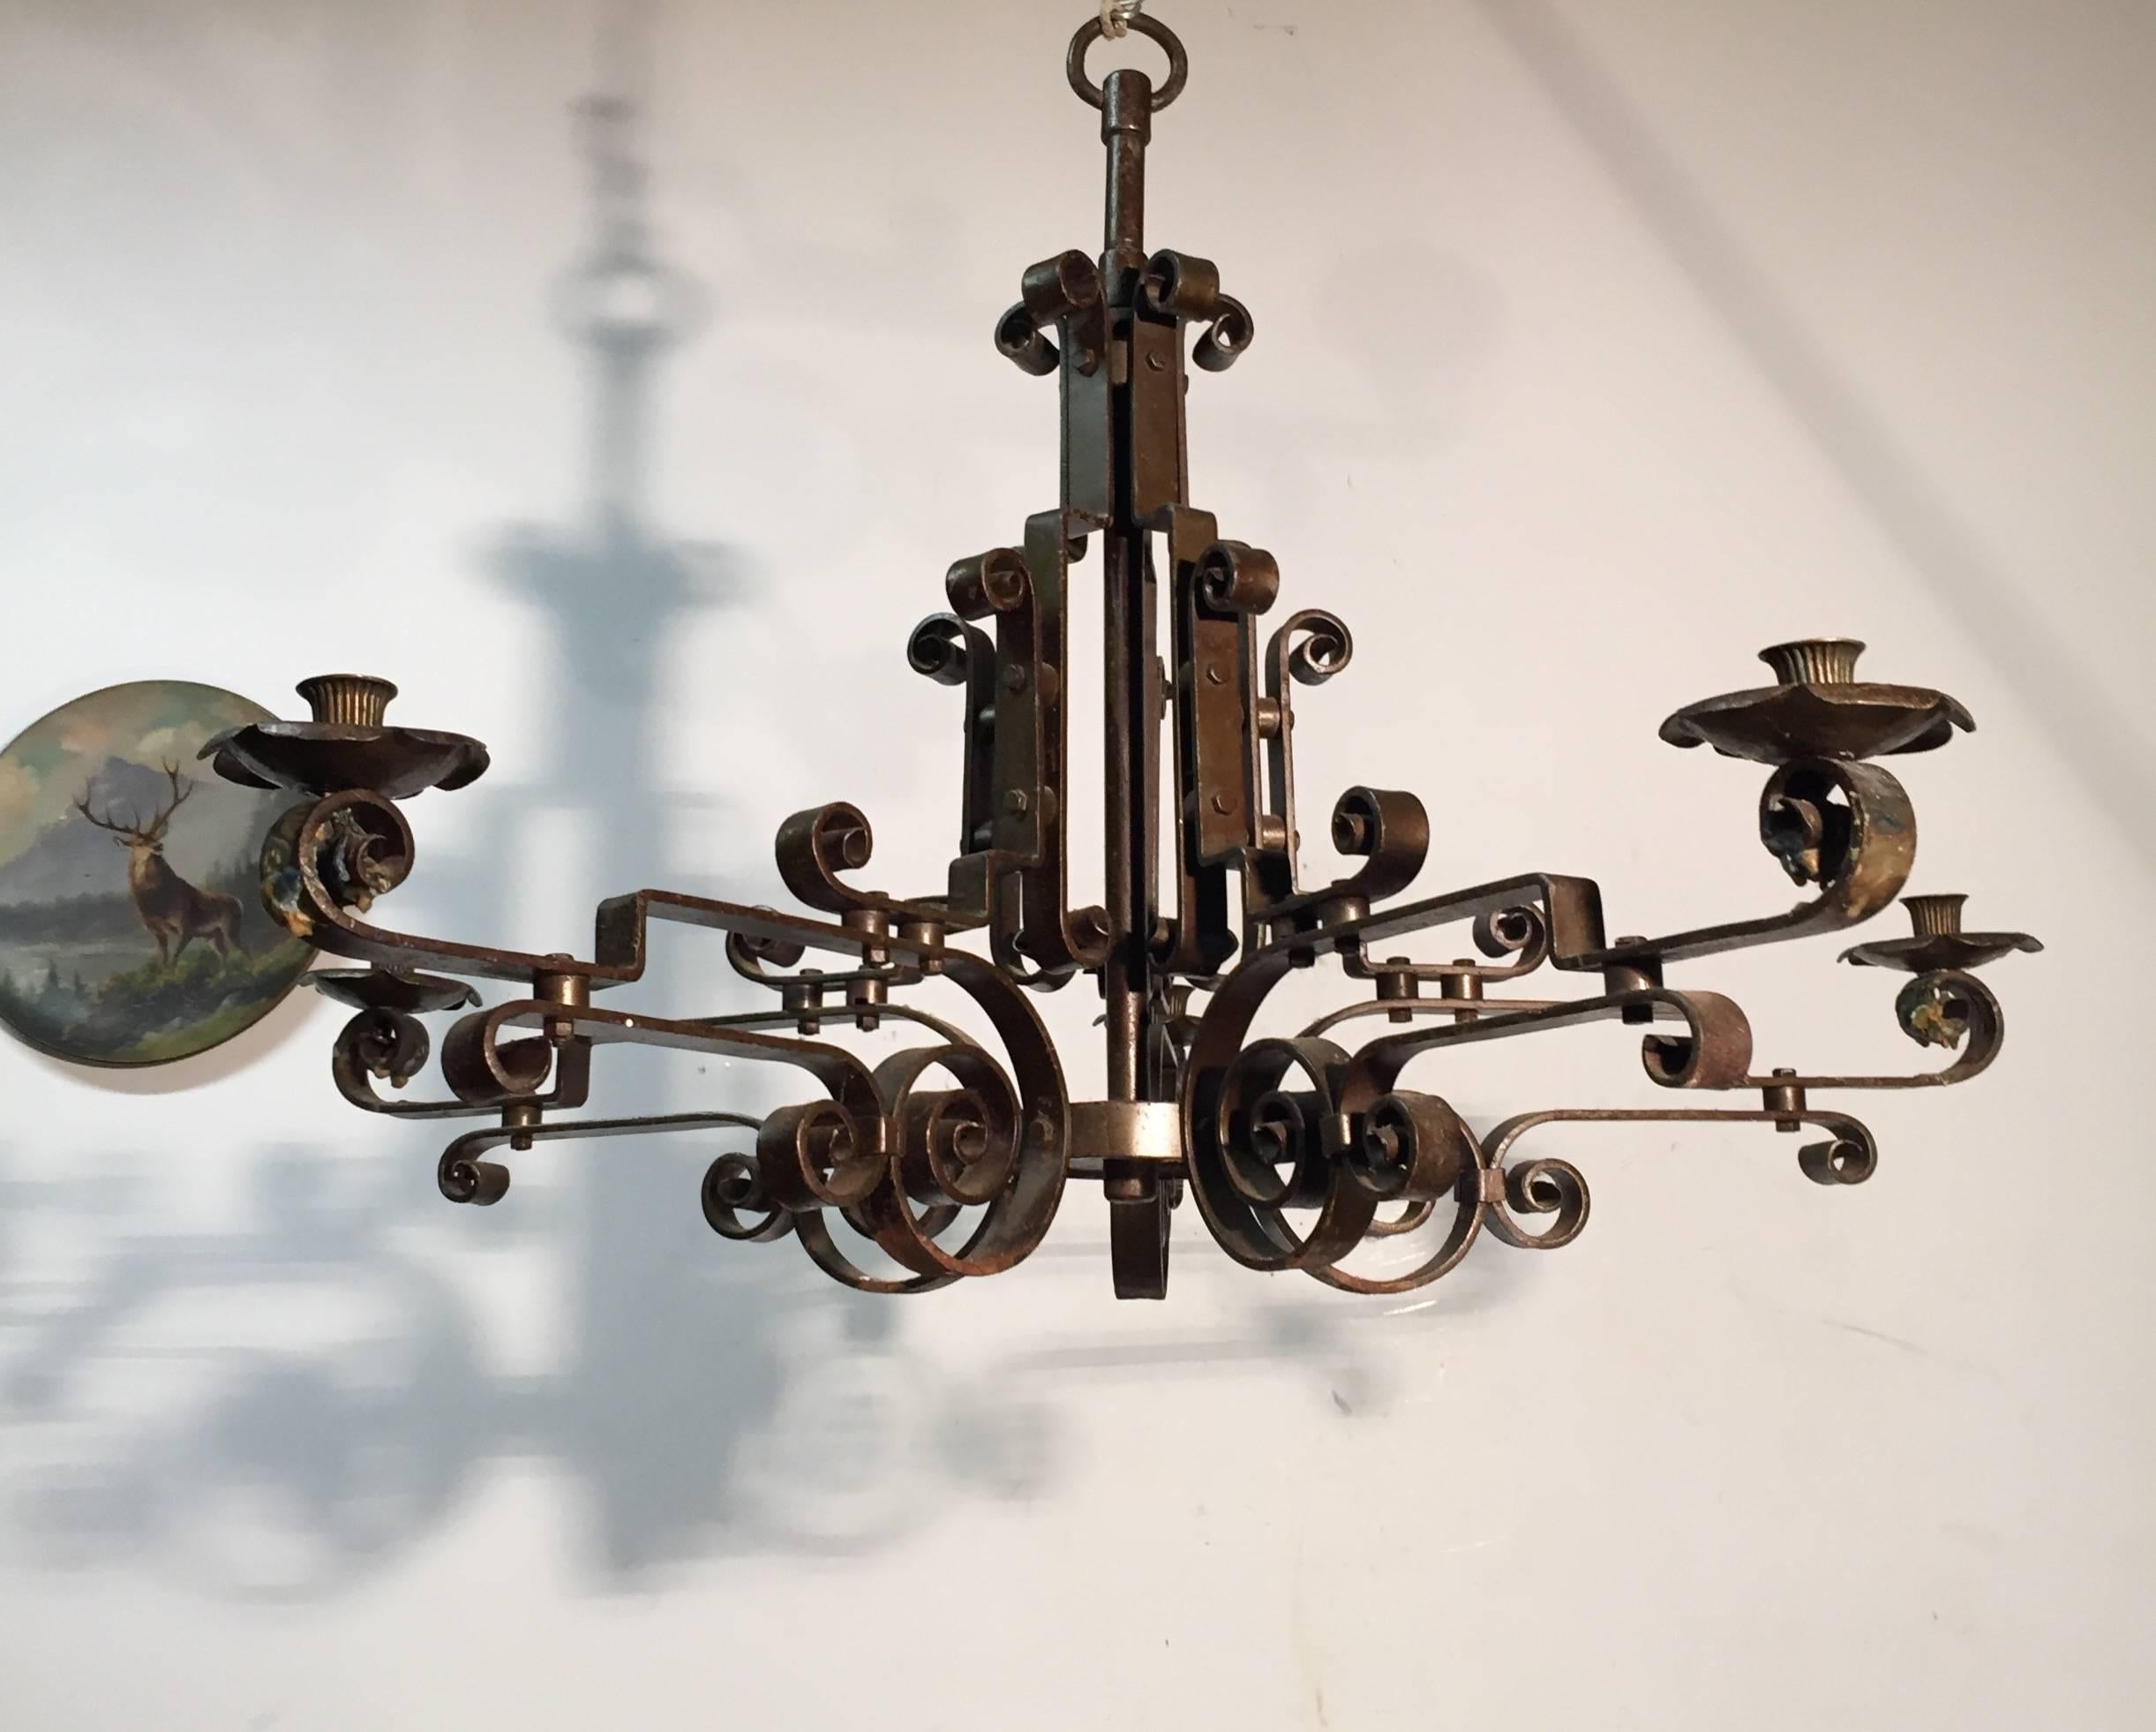 Modern Mid-Century Symmetrical Wrought Iron 5 Arm Candles or Electrical Chandelier